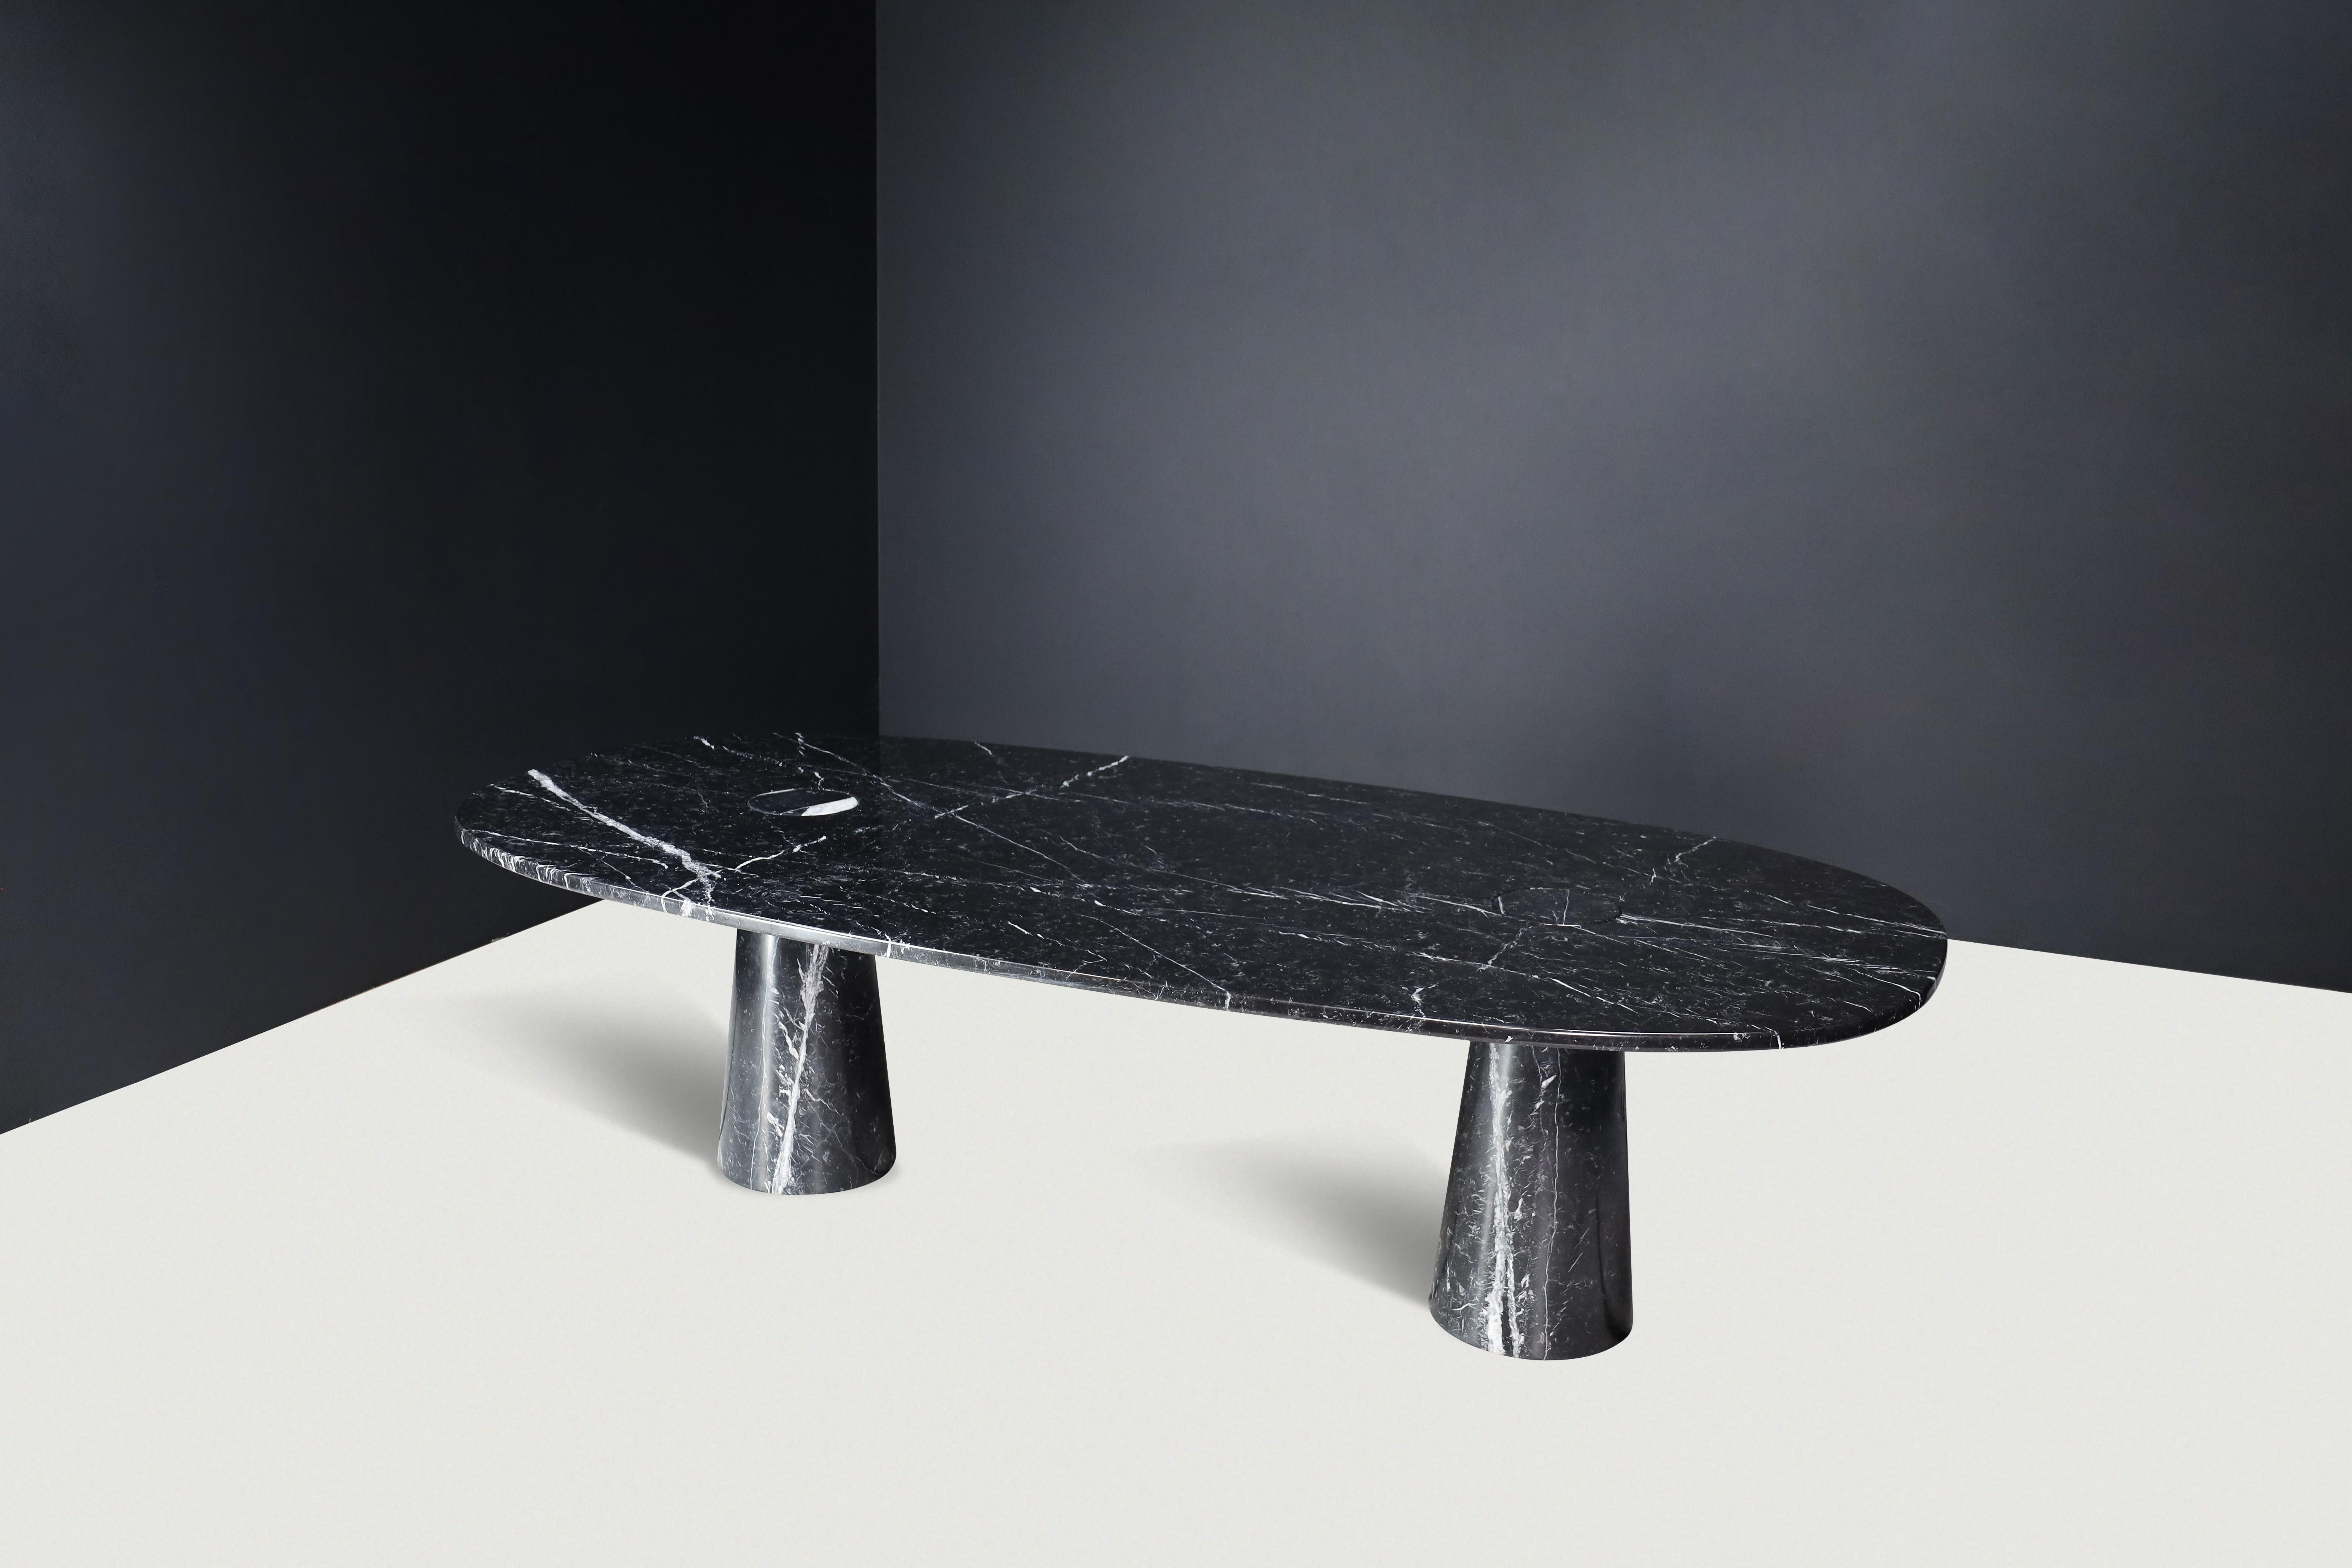 Angelo Mangiarotti for Skipper 'Eros' Large Oval dining table or executive desk In black Marquina Marble, Italy, 1970s.

This impressive sculptural table or executive desk, designed by Angelo Mangiarotti, exemplifies extraordinary postmodern design.